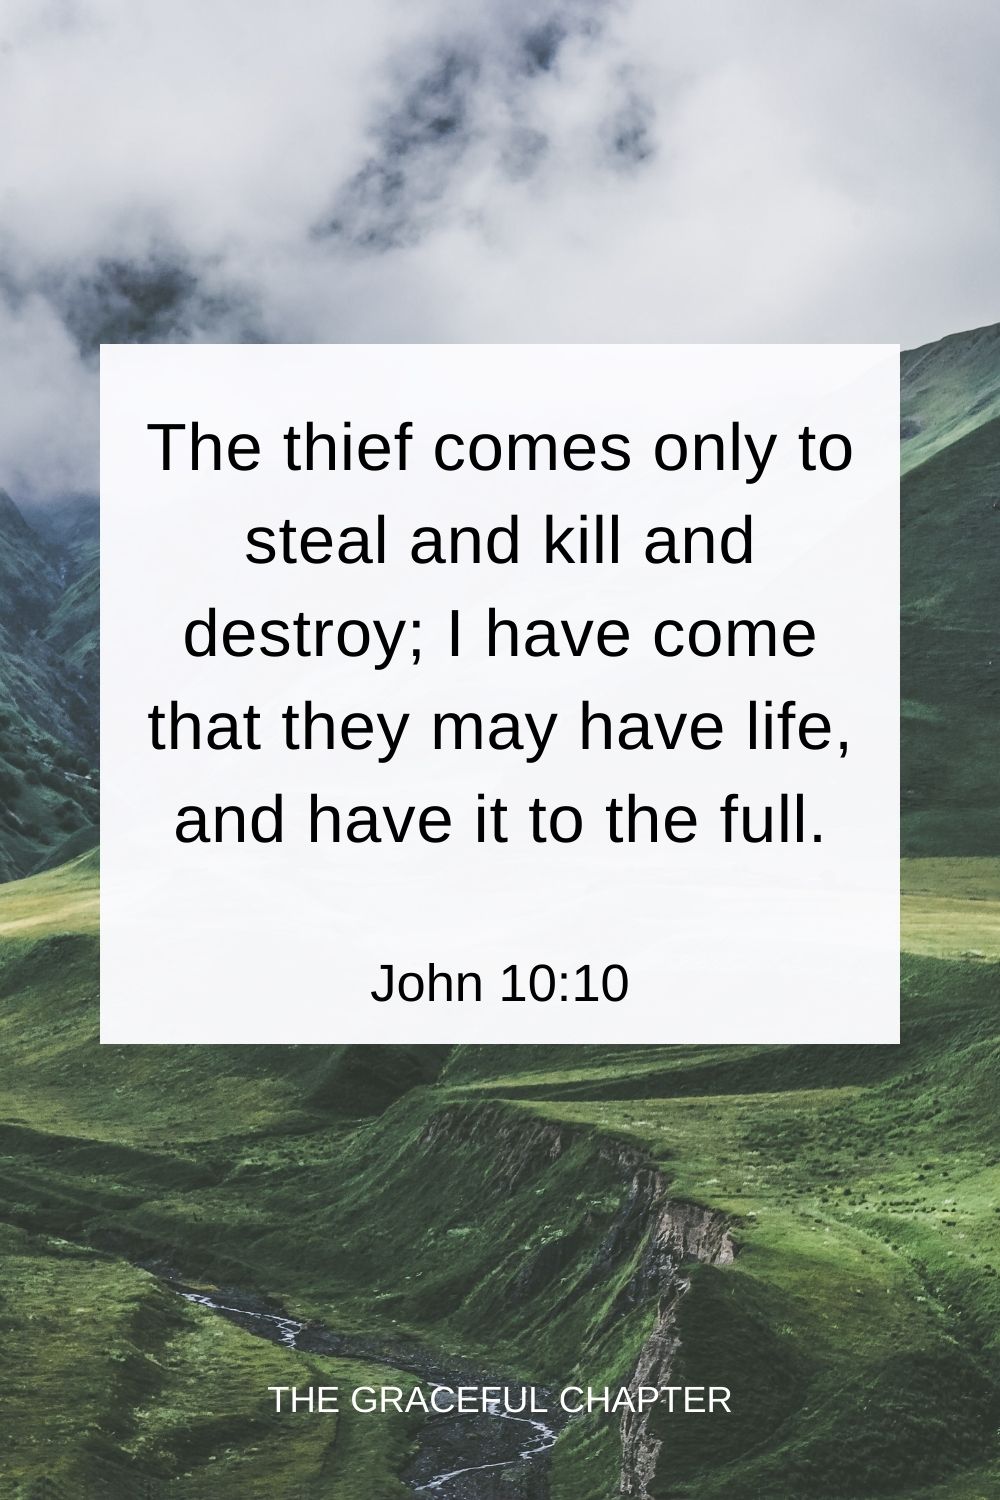 The thief comes only to steal and kill and destroy; I have come that they may have life, and have it to the full. John 10:10